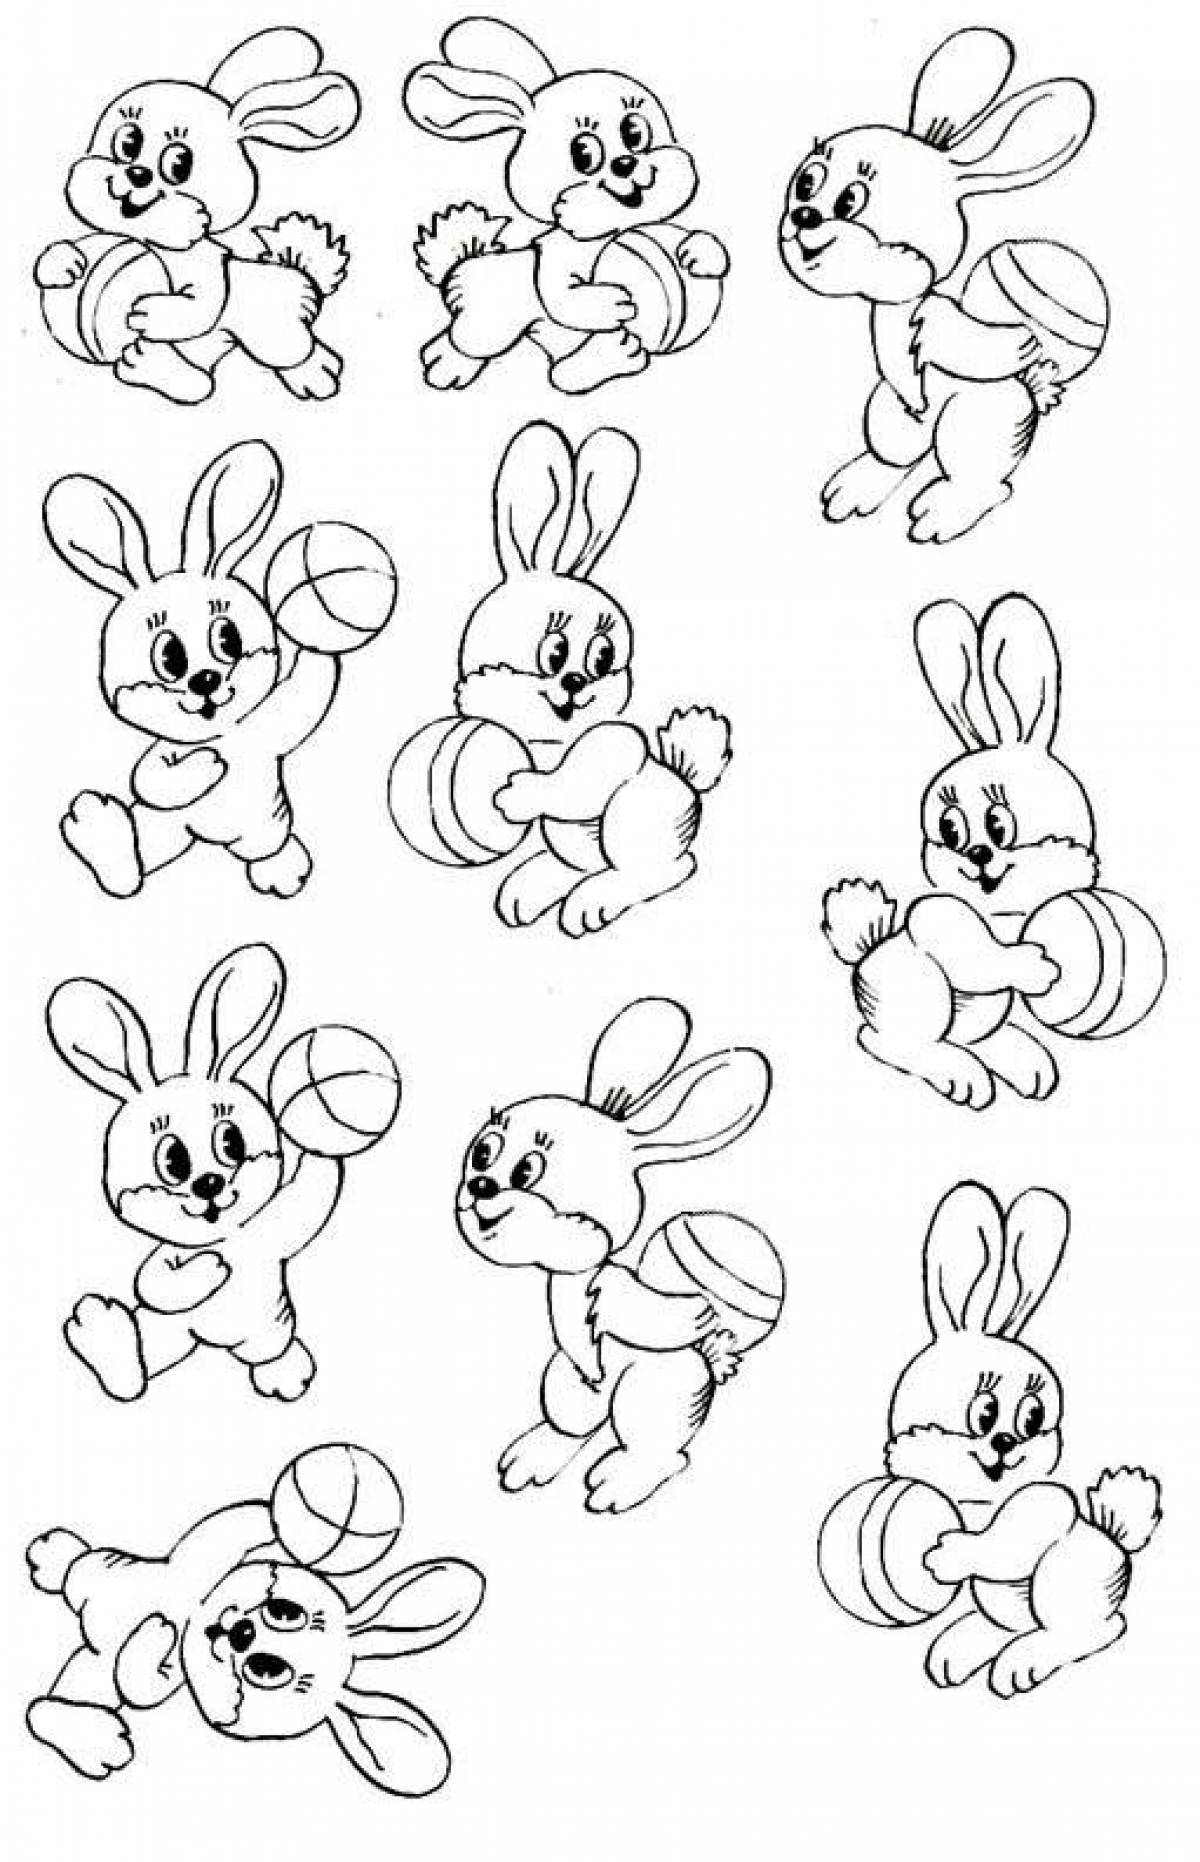 Great bunny coloring game